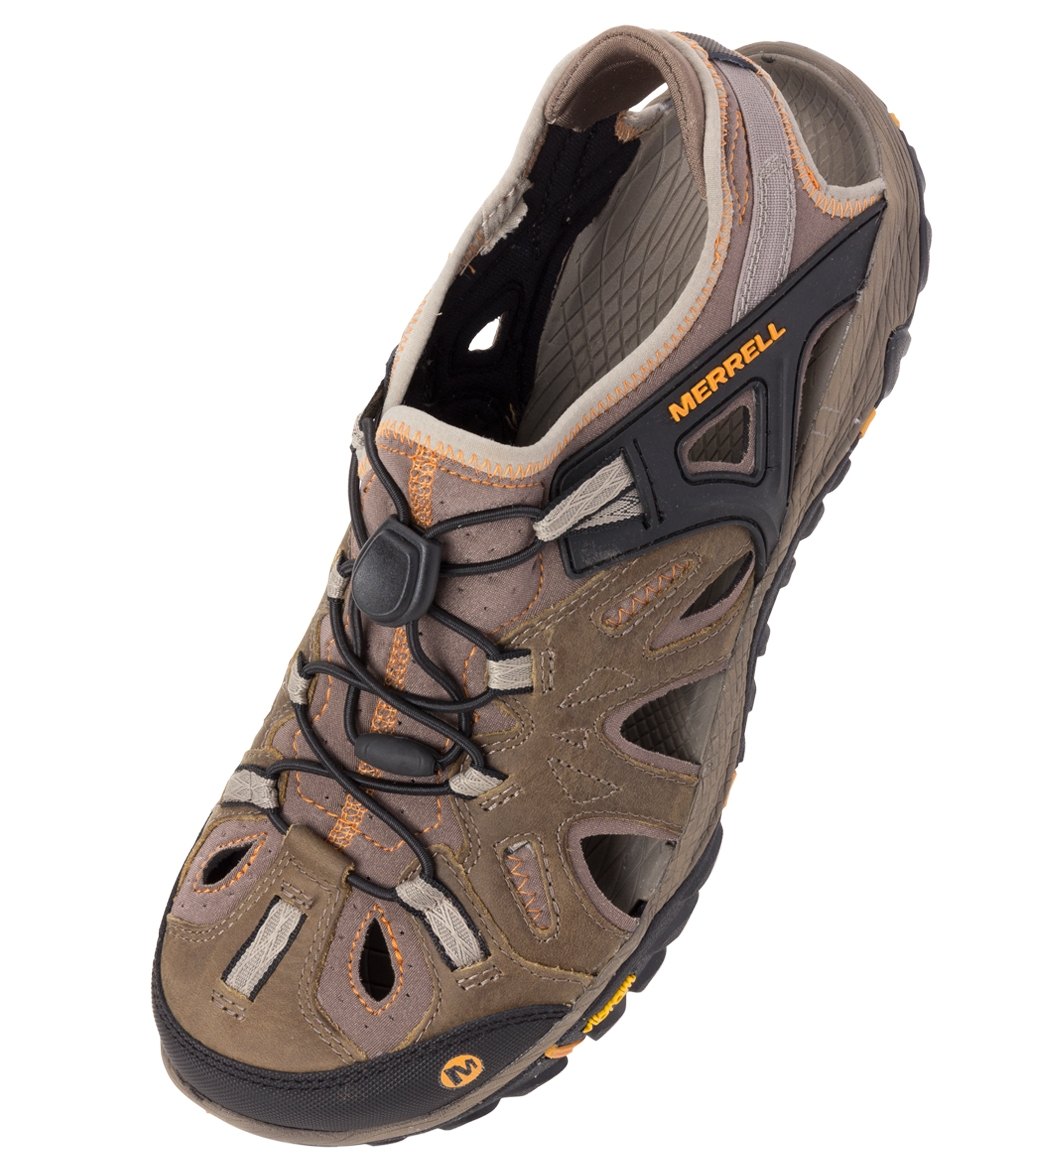 Merrell Men's All Out Blaze Sieve Water Shoes at SwimOutlet.com